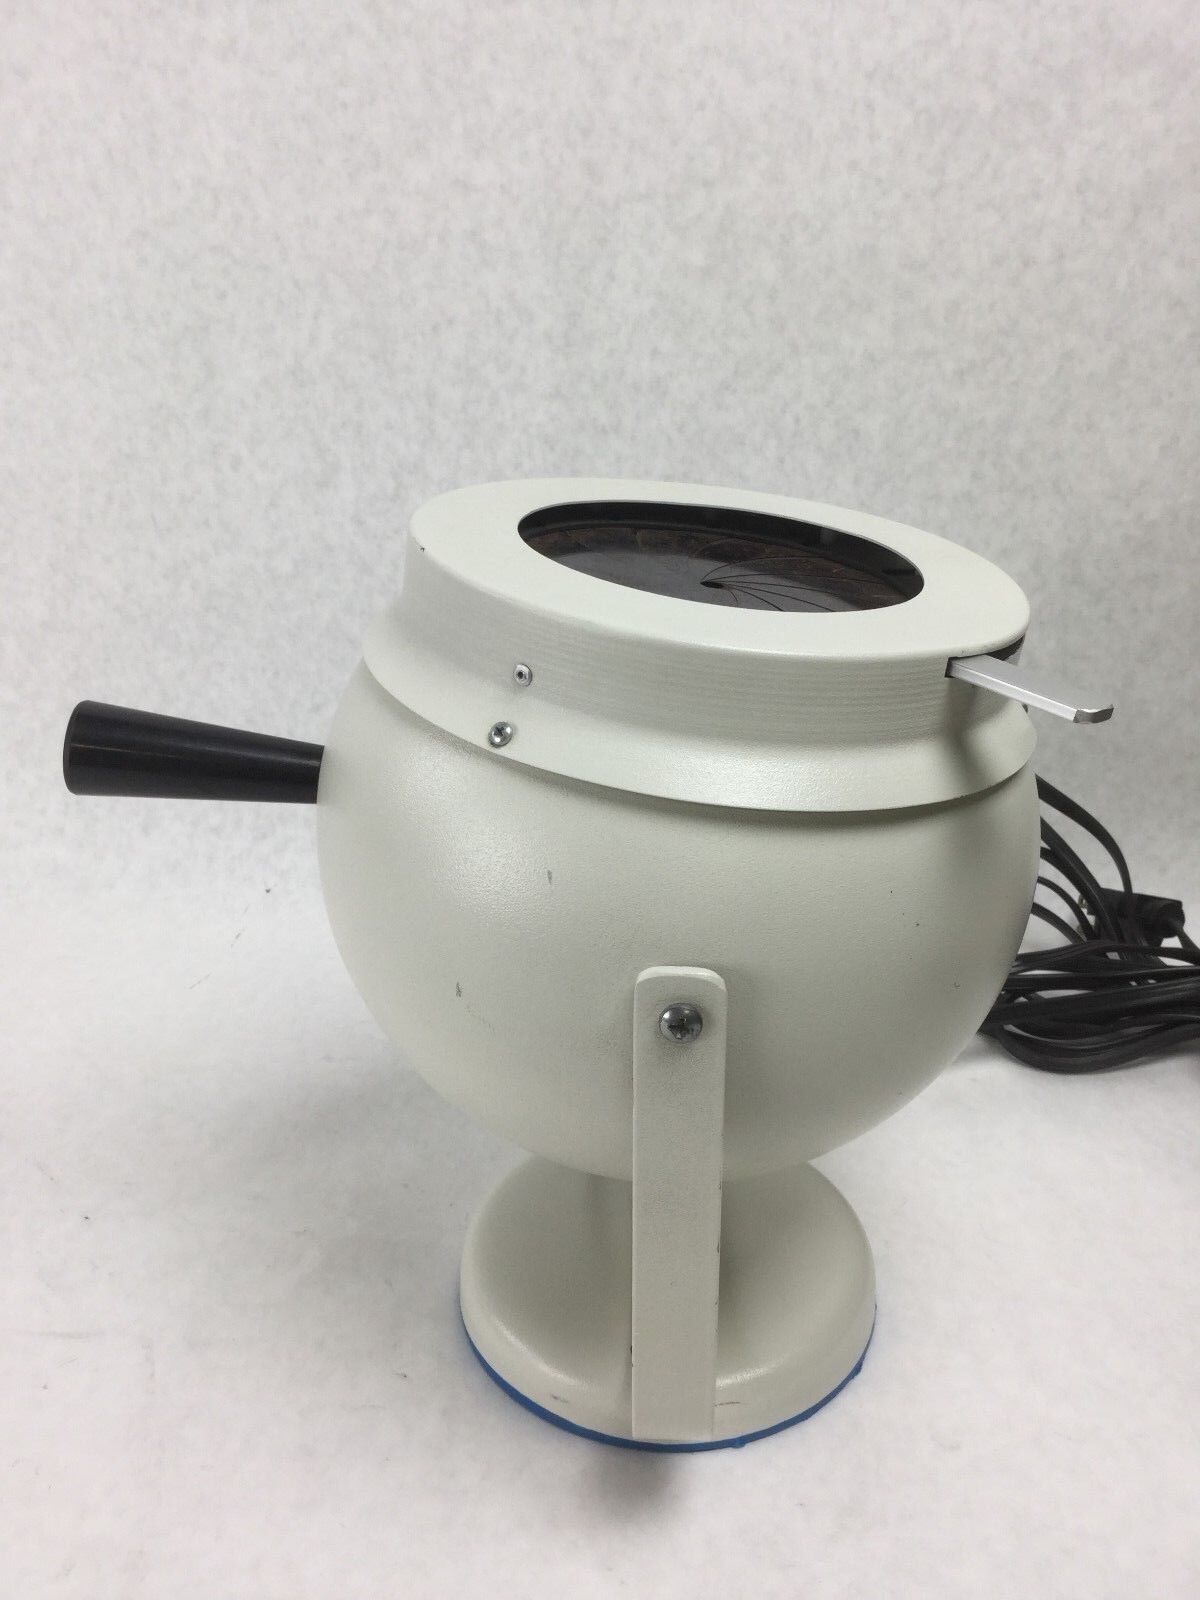 Portable Lamp with Foot Pedal, Broadwest Corp, New York, NY, WORKS